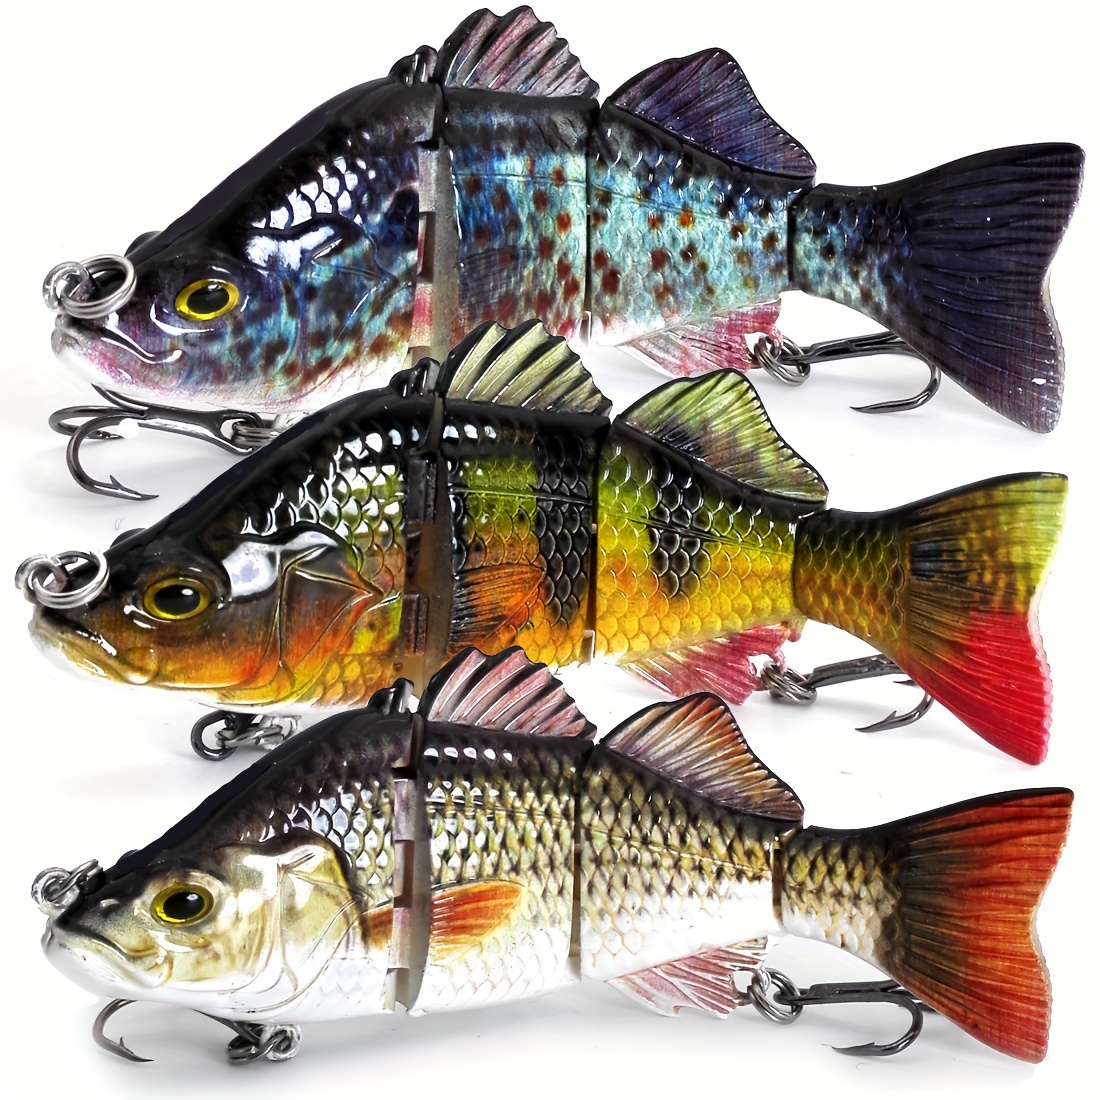 Jointed Swimbait Hard Bait Fishing Lures for Bass, Trout, and Perch -  Freshwater and Saltwater Tackle Kit with 3 Lures for Maximum Catch Potential